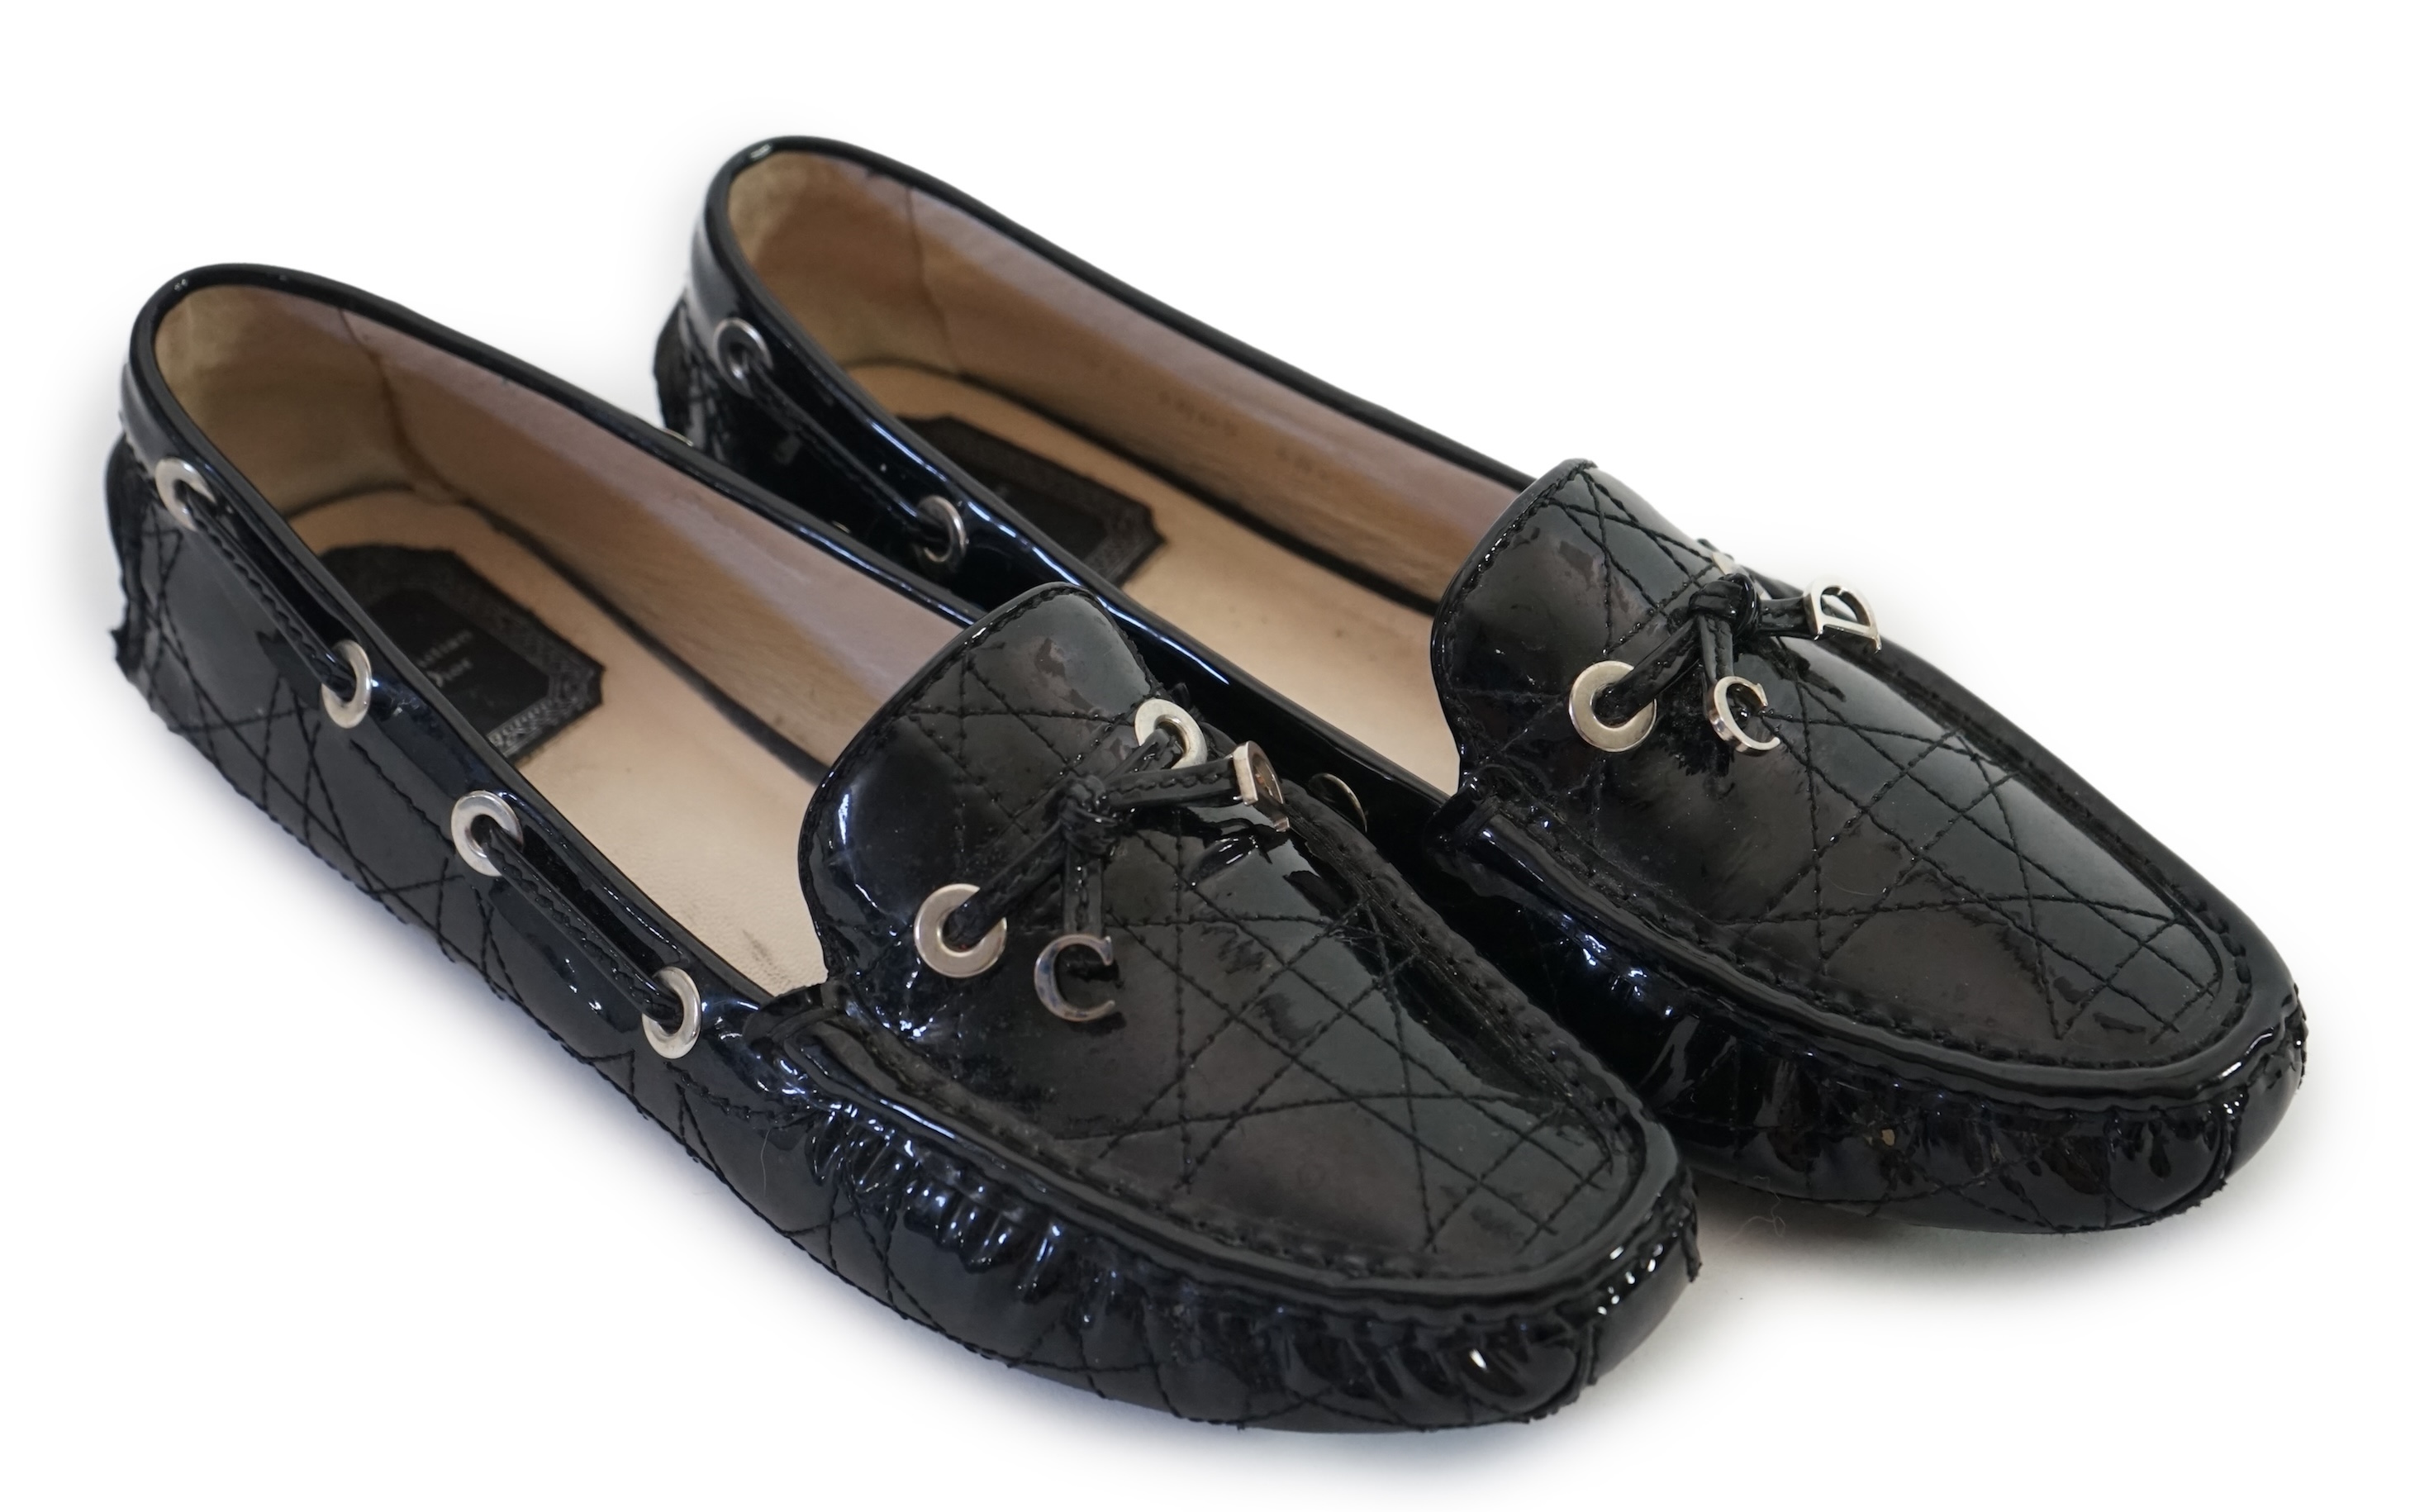 A pair of Christian Dior black patient leather lady's driving shoes with dustbag and in original box. Size 38.5. Proceeds to Happy Paws Puppy Rescue